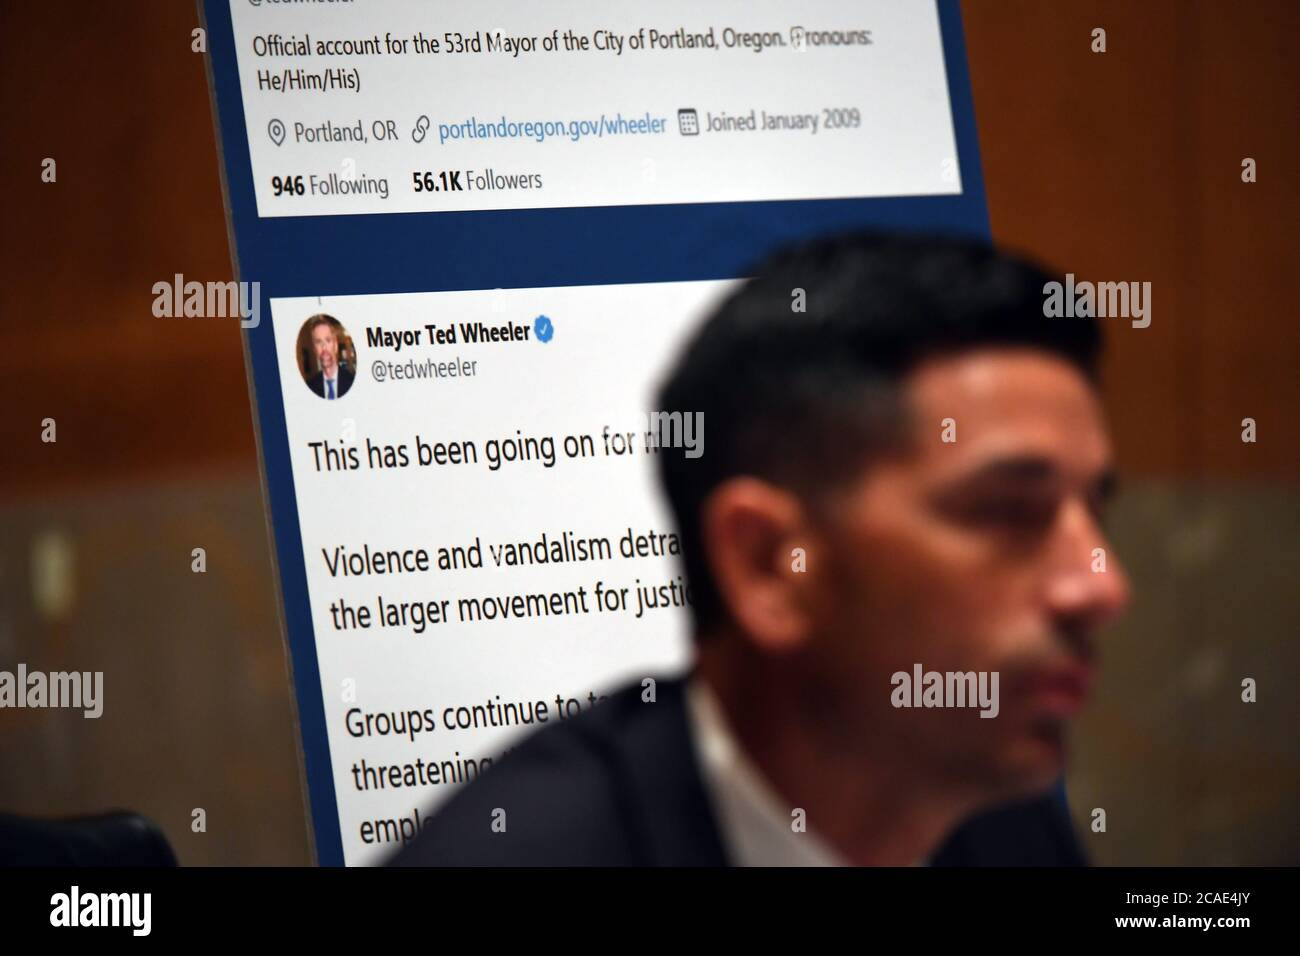 The tweets from Portland Mayor Ted Wheeler are displayed behind acting United States Secretary of Homeland Security Chad F. Wolf, who is appearing before the US Senate Homeland Security and Governmental Affairs Committee on August 6, 2020 in Washington, DC to explain the use of federal agents during protests in Portland, Oregon. Credit: Toni Sandys/Pool via CNP/MediaPunch Stock Photo